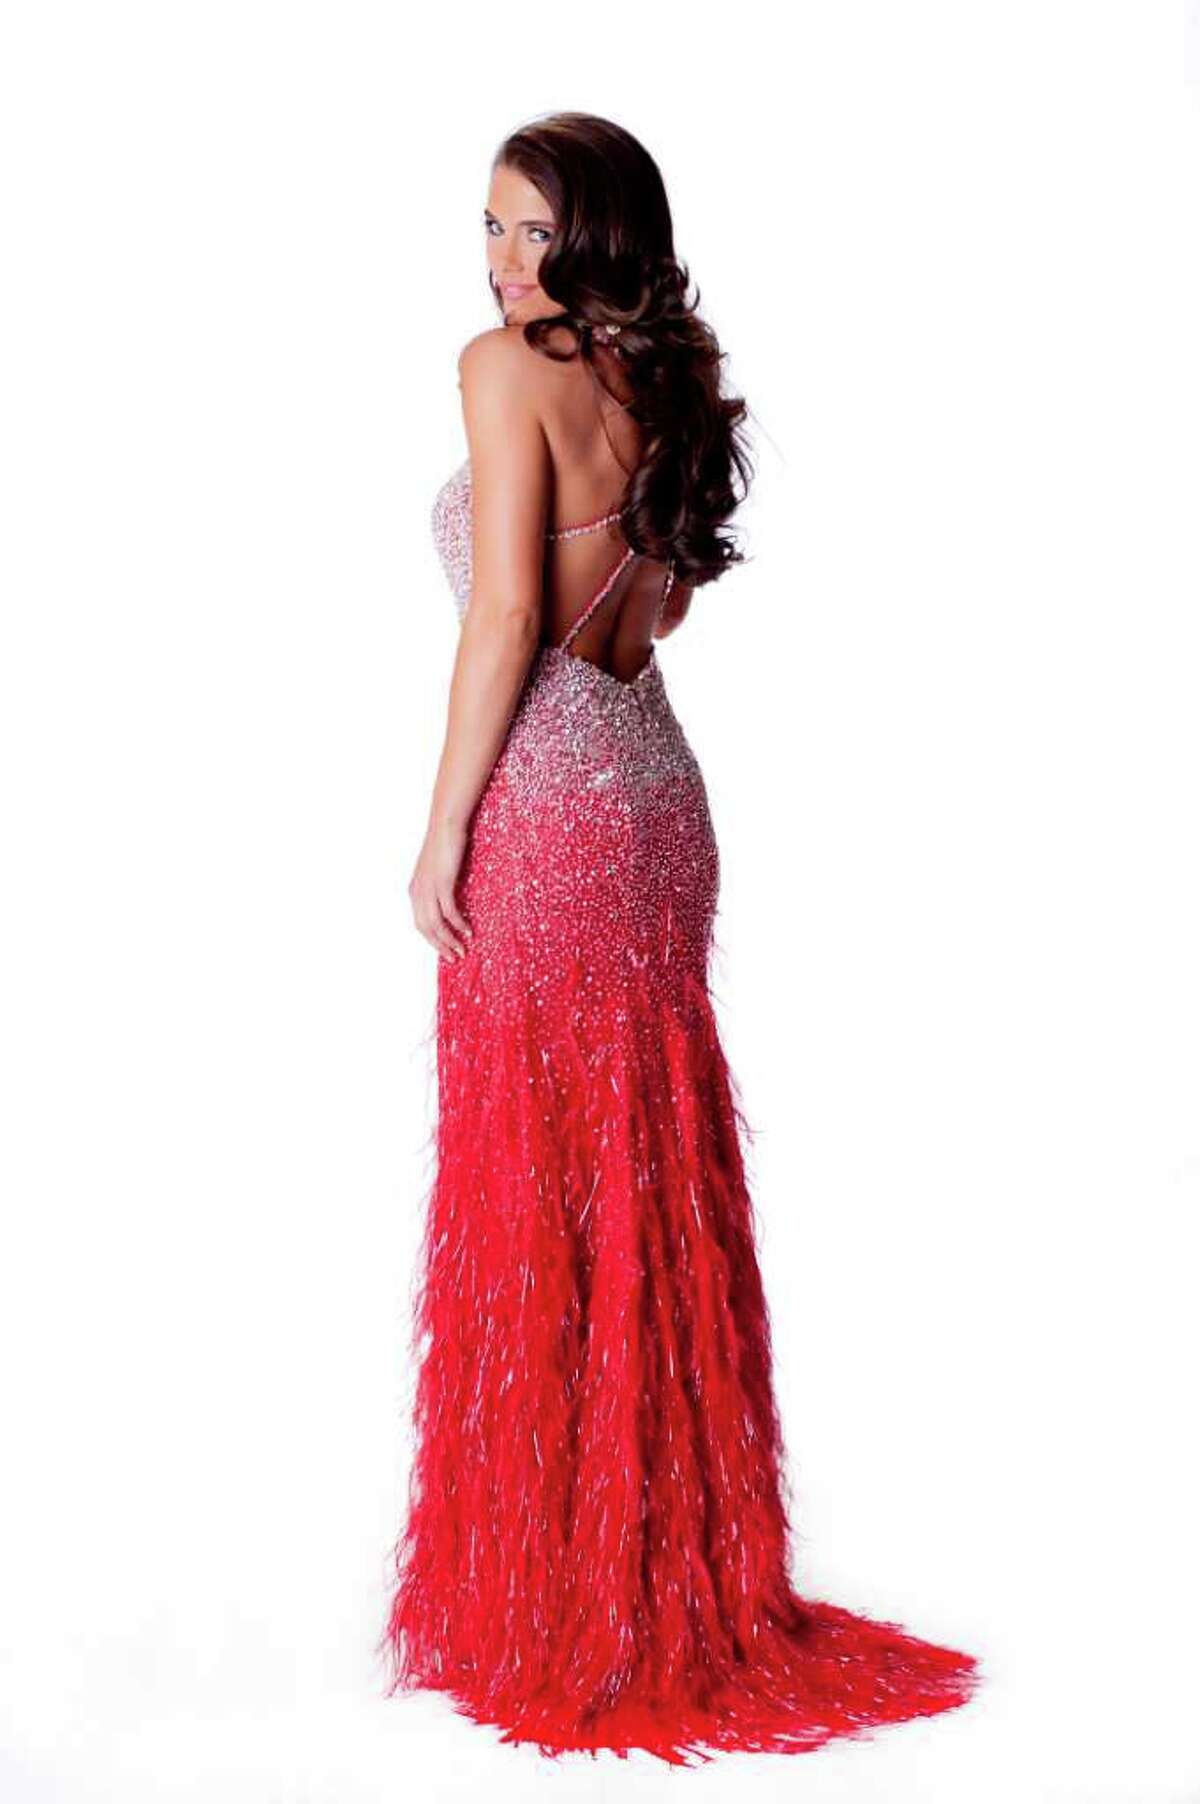 Miss Alabama USA 2011, Madeline Mitchell, poses in an evening gown upon arriving at Planet Hollywood Resort and Casino in Las Vegas on June 5, 2011. Mitchell and 51 other contestants are preparing to compete in the 2011 Miss USA Pageant on Sunday, June 19 at 9 p.m. ET/PT broadcast on NBC from the Theatre for Performing Arts in Las Vegas. You can vote for your favorite contestant, with the winner getting a direct berth in the semifinals, at http://www.missuniverse.com/missusa/members/contestants. The Miss Universe Organization advises that all images in this slideshow have been retouched.